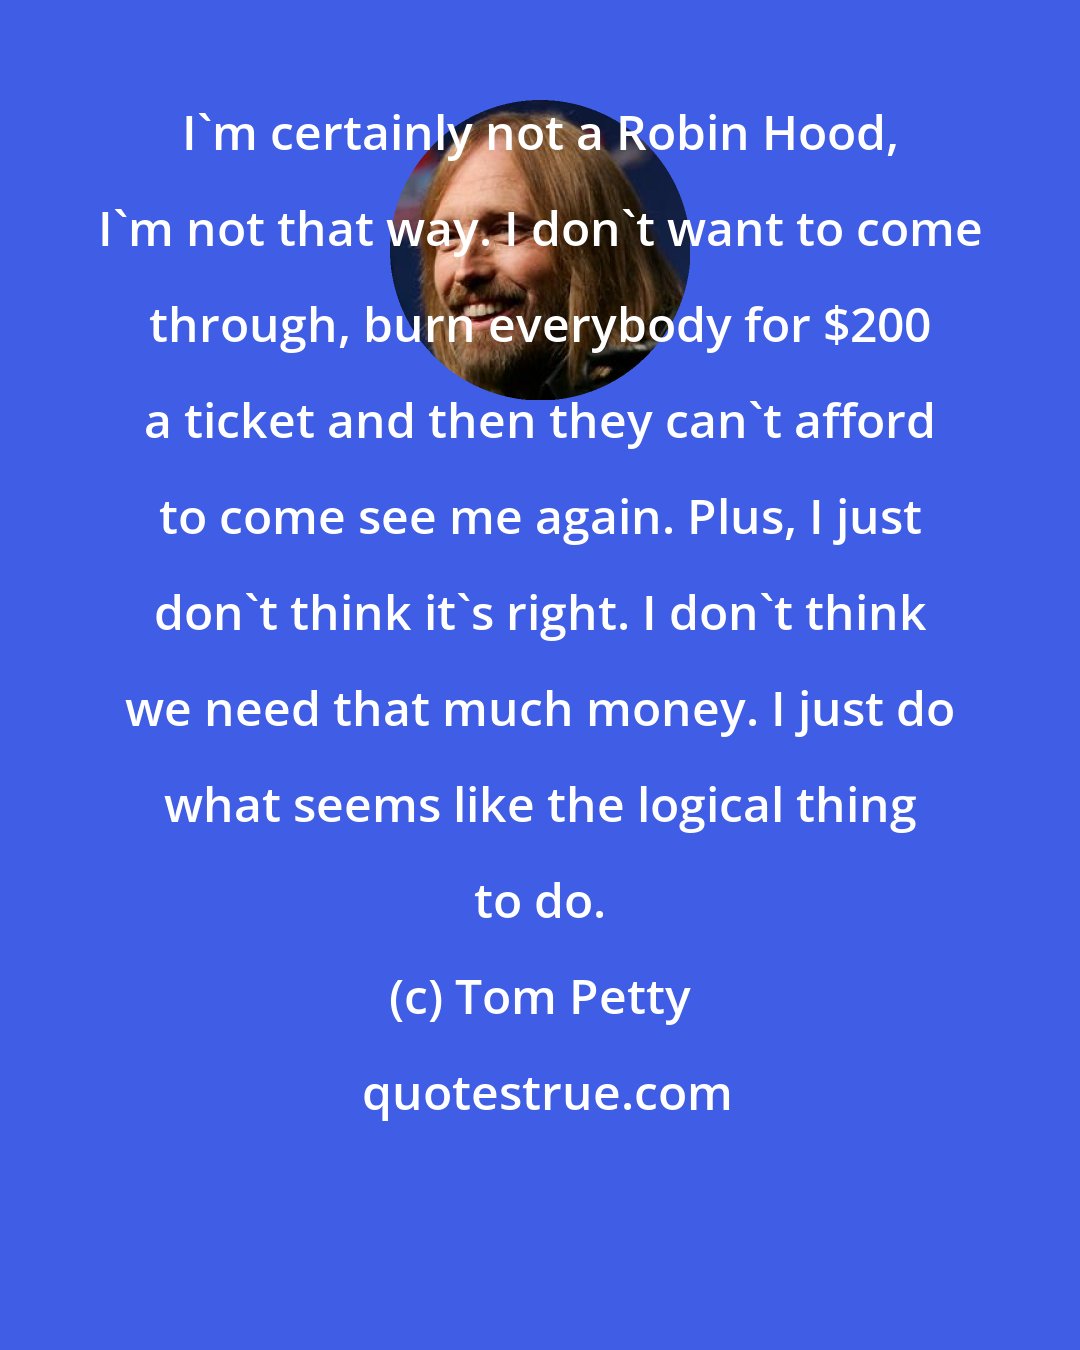 Tom Petty: I'm certainly not a Robin Hood, I'm not that way. I don't want to come through, burn everybody for $200 a ticket and then they can't afford to come see me again. Plus, I just don't think it's right. I don't think we need that much money. I just do what seems like the logical thing to do.